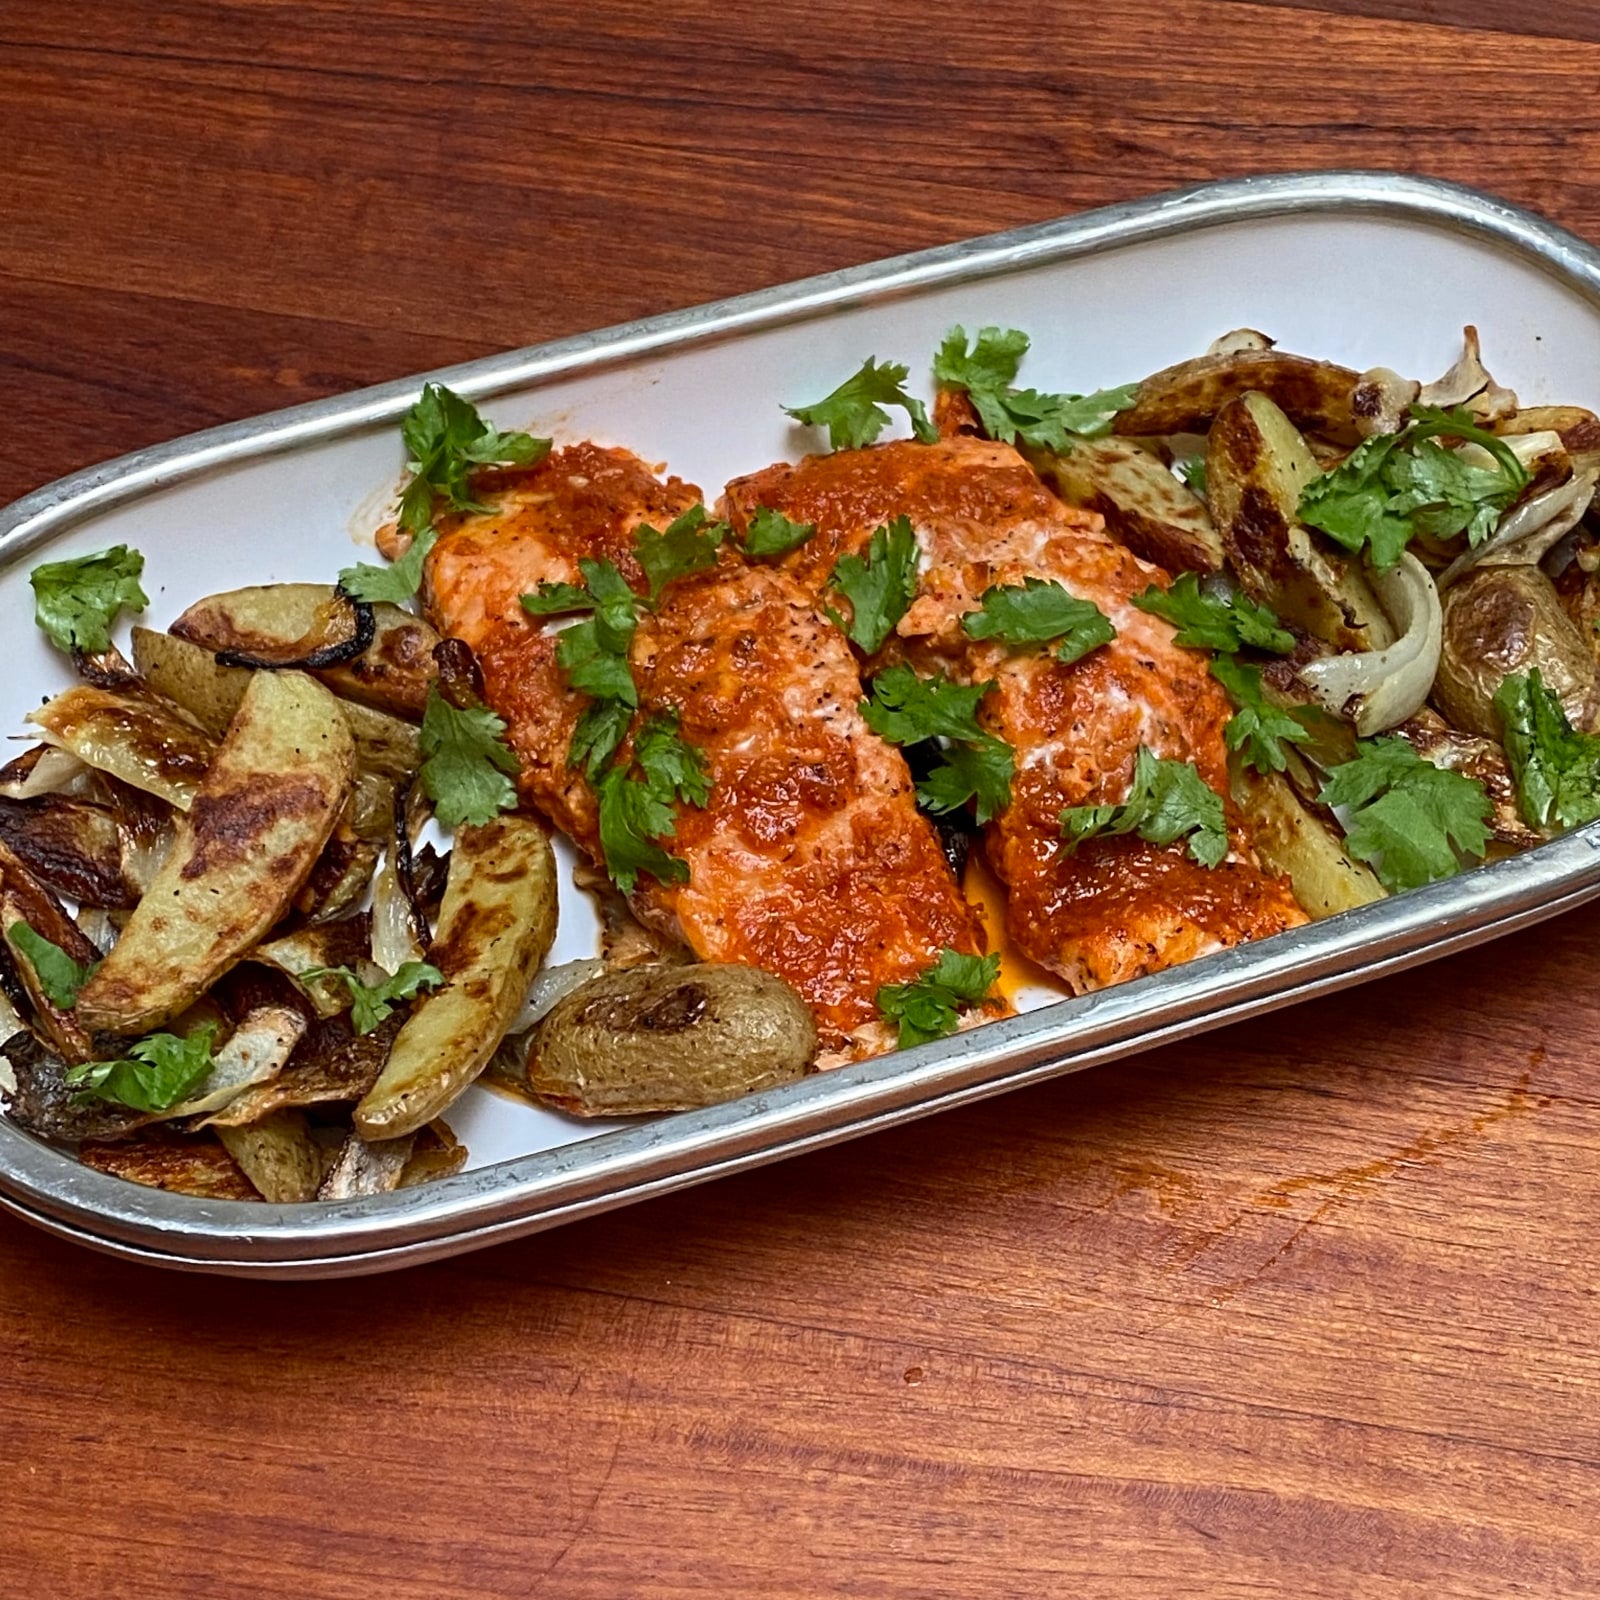 Sheet-Pan Harissa Salmon with Citrus Inspired by Colu Henry of the NYT